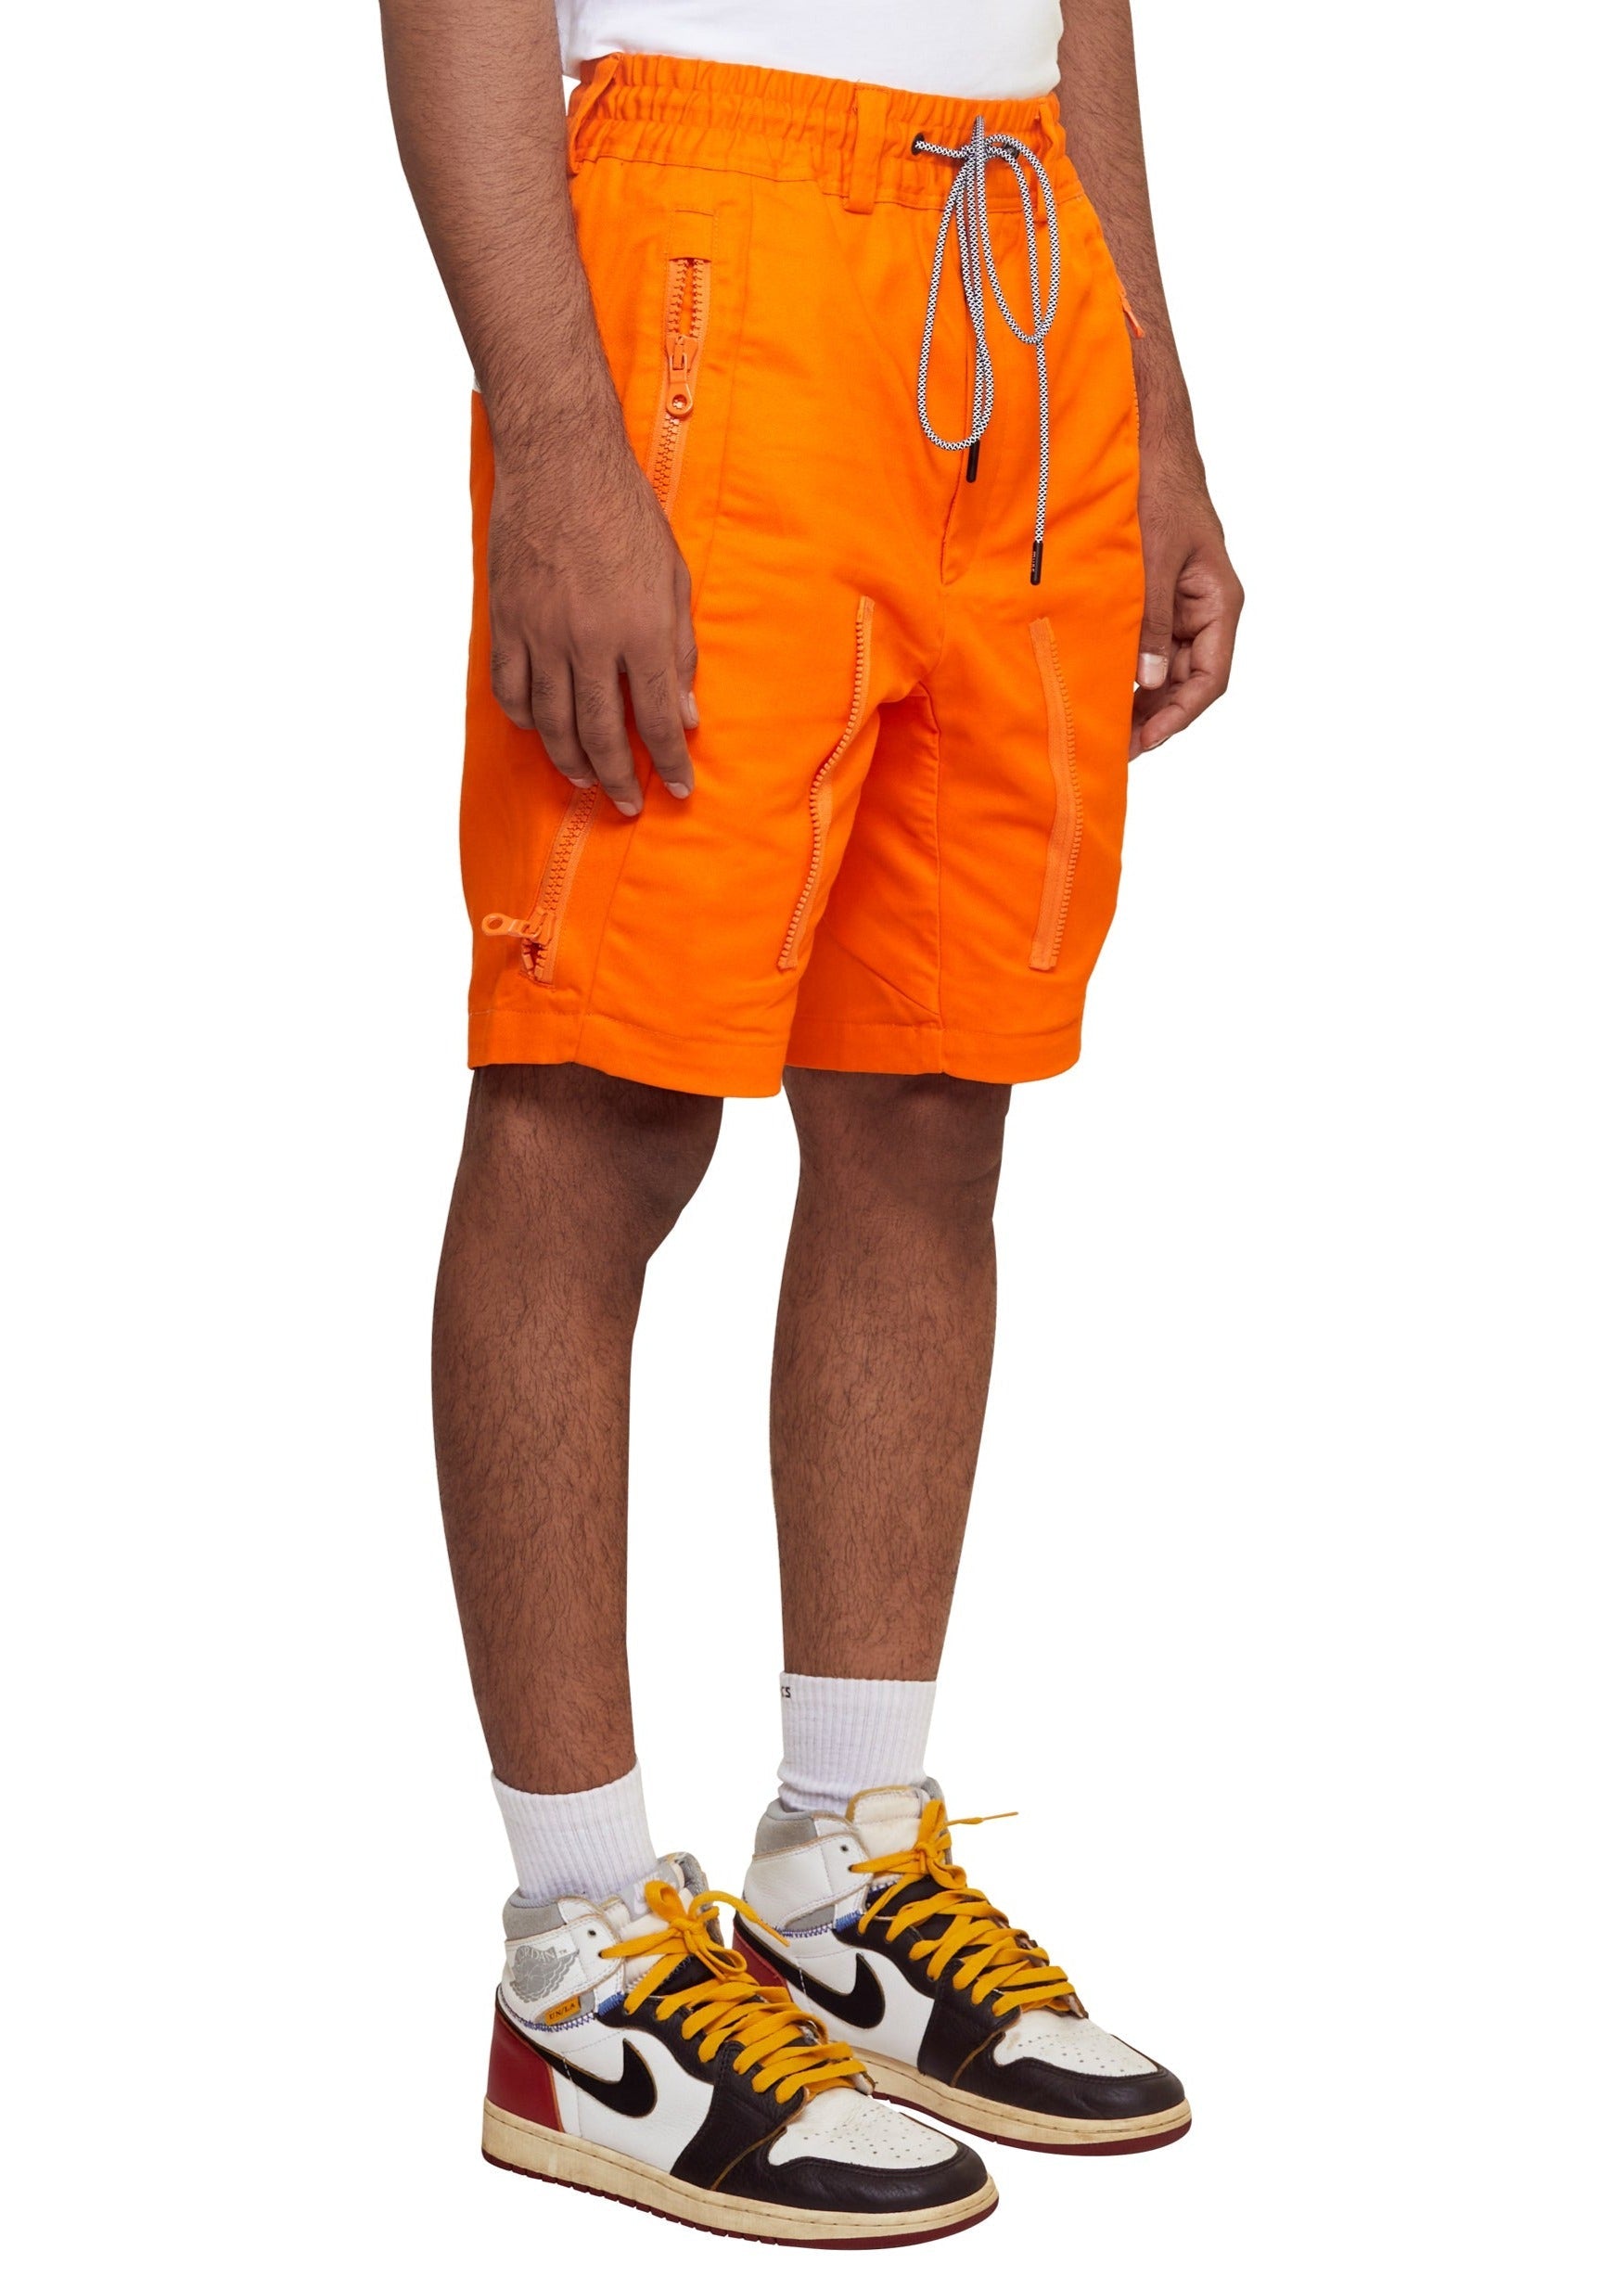 Orange cotton knee-lengh Zipoff Cargo Shorts from the brand Mostly Heard Rarely Seen